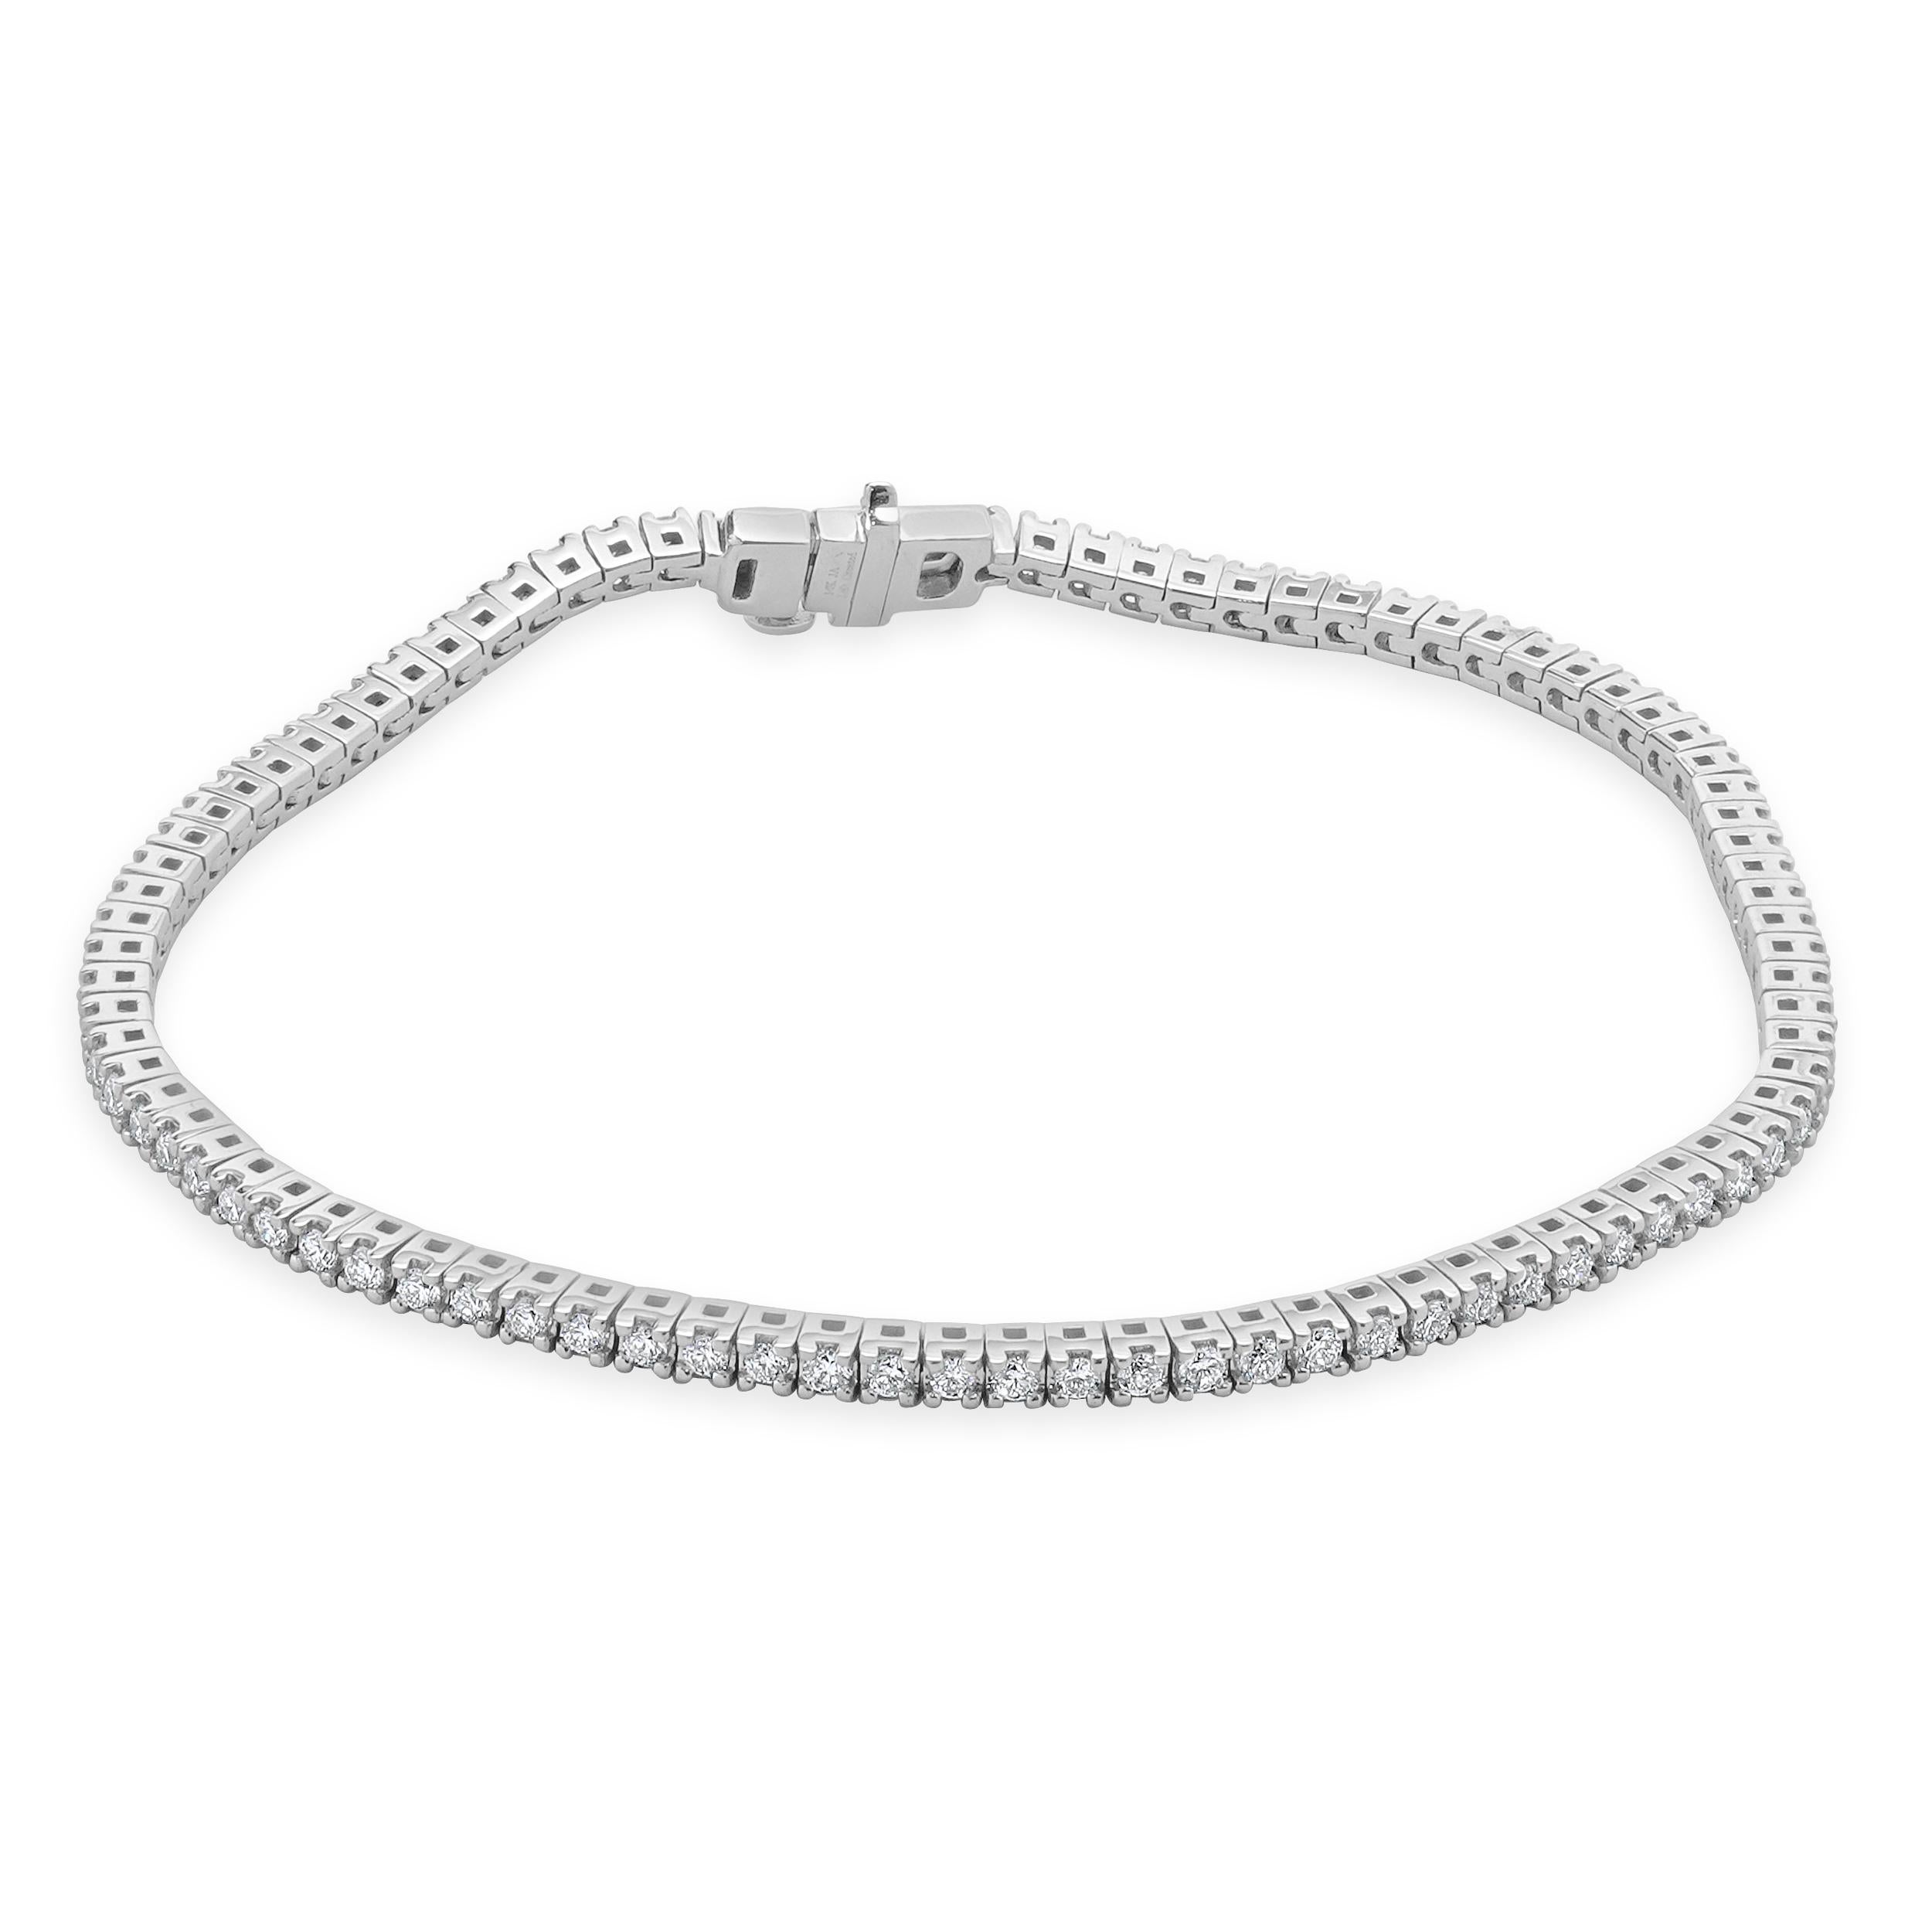 Designer: custom design
Material: 14K white gold
Diamond: 89 round brilliant cut = 1.50cttw
Color: E/F
Clarity: SI1-2
Dimensions: bracelet will fit up to a 7-inch wrist
Weight: 8.43 grams
